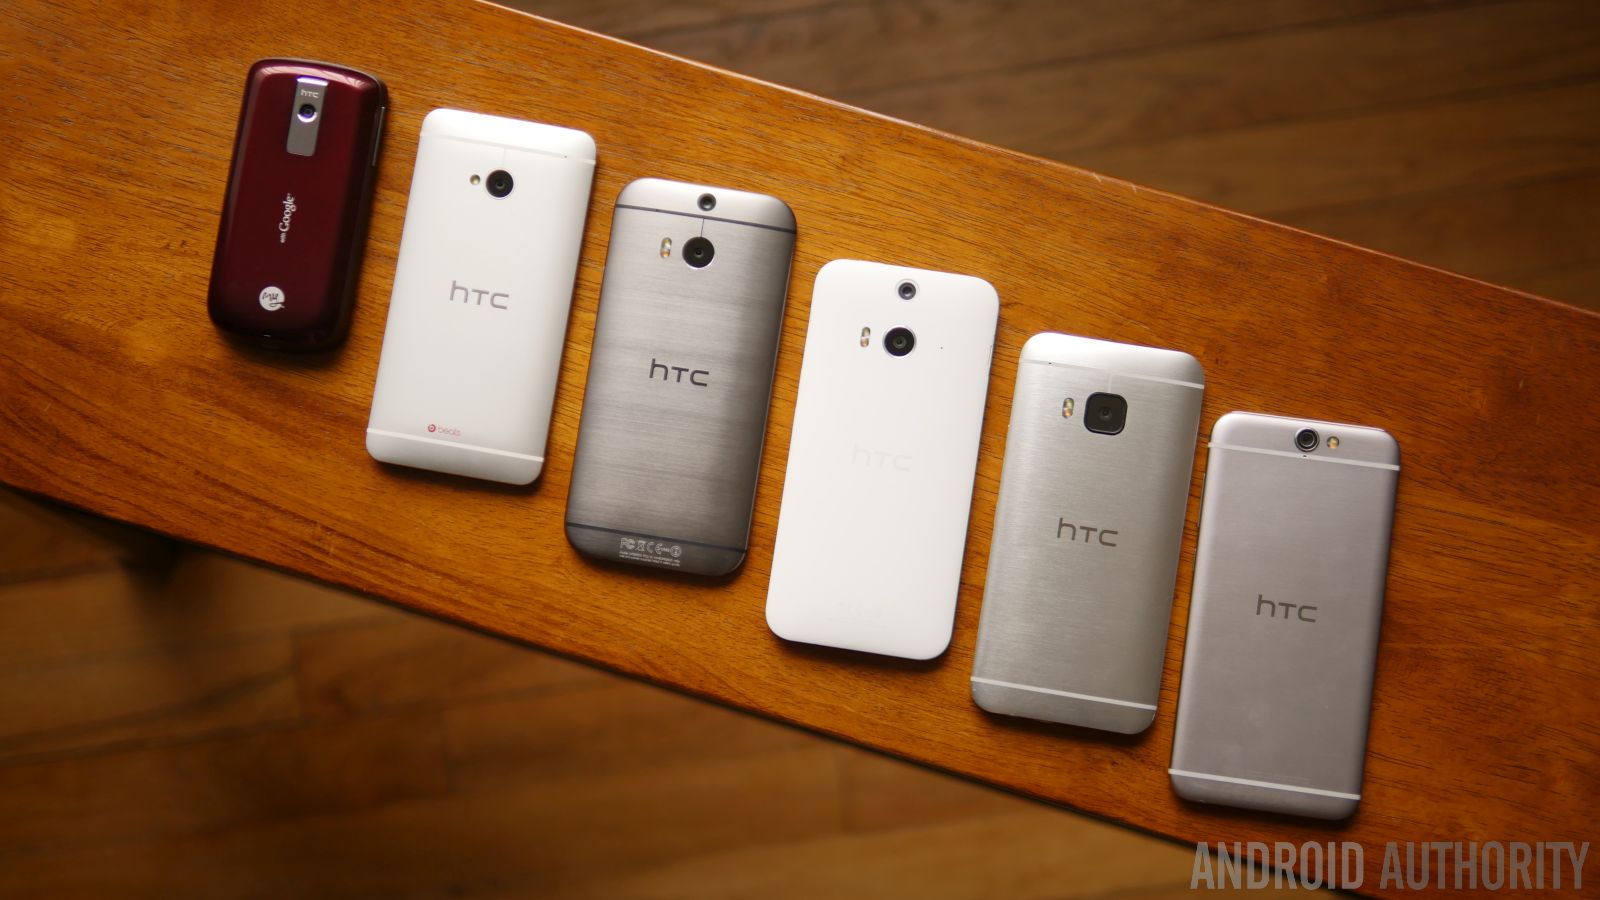 History of HTC's Android designs